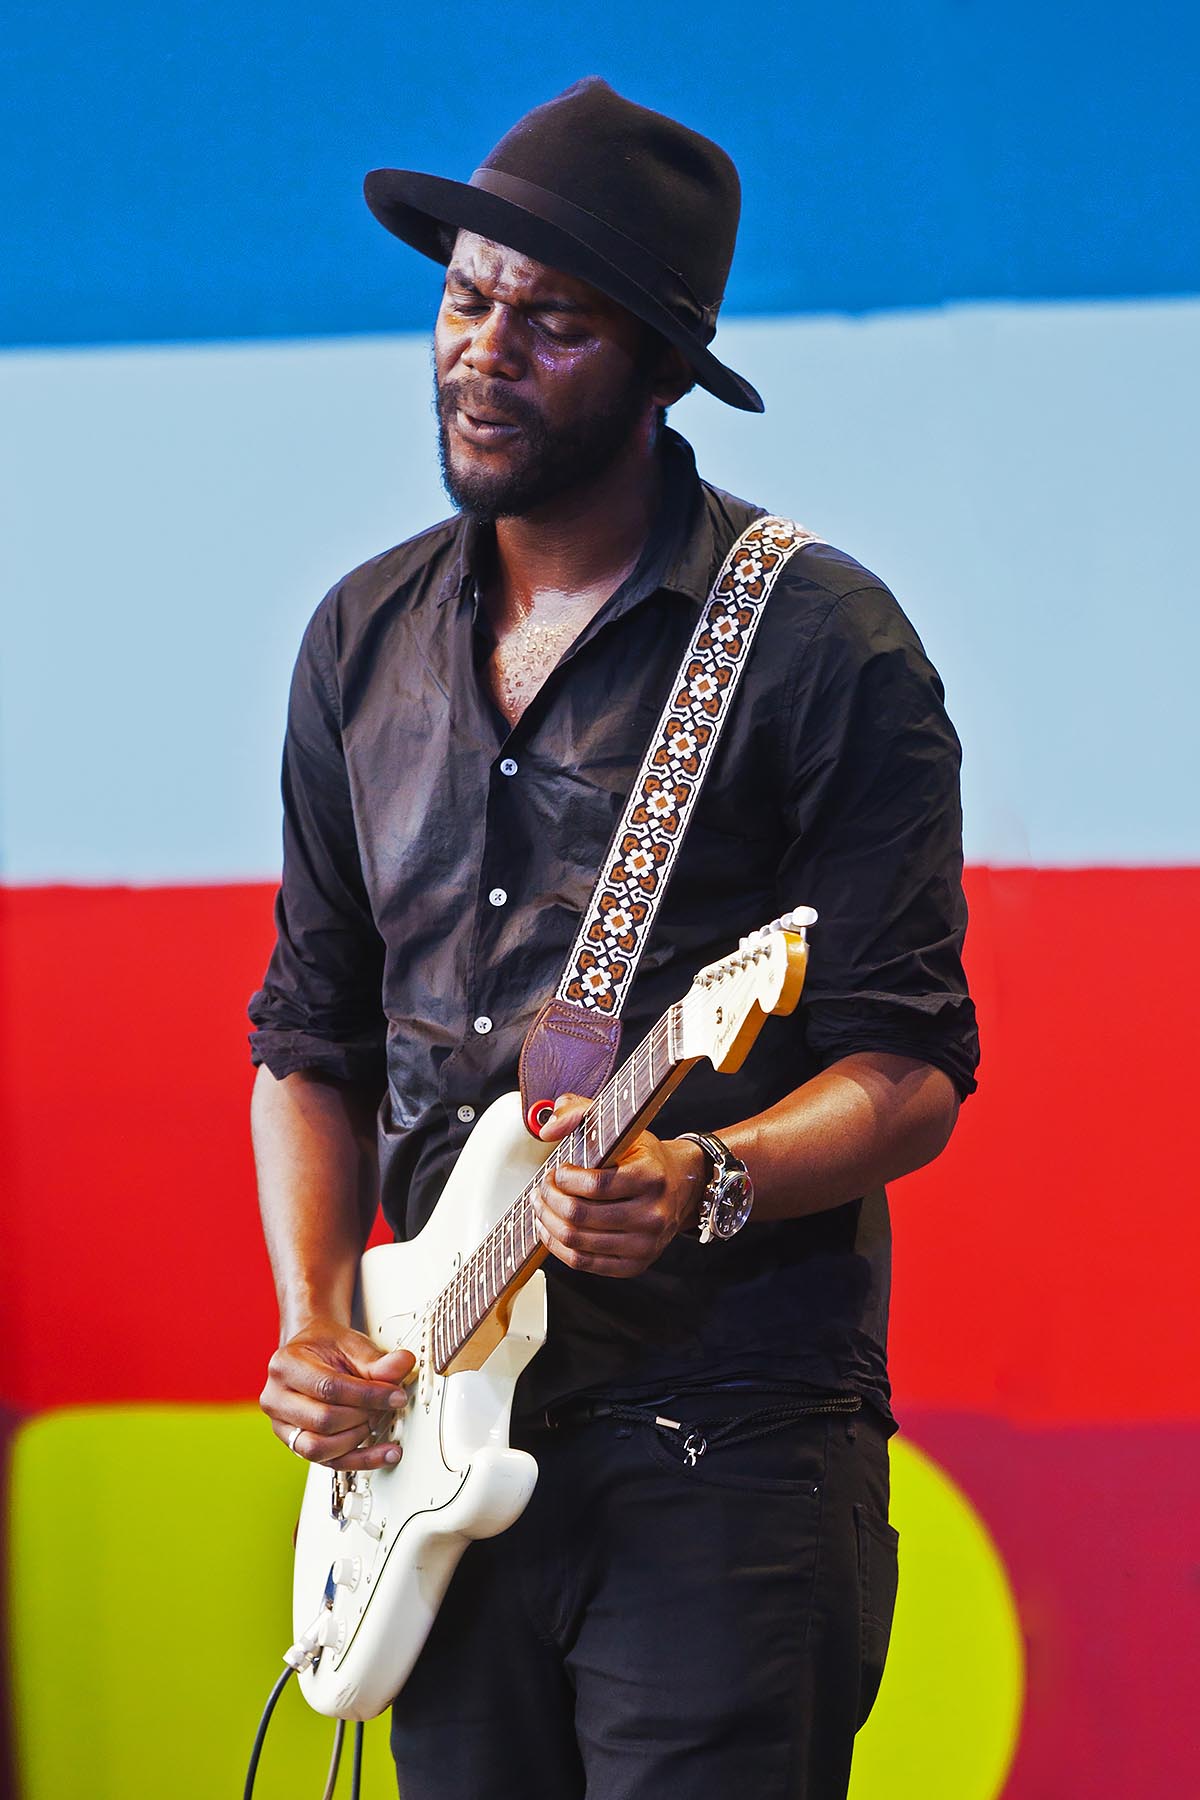 GARY CLARK JR. preforms on the main stage at the MONTEREY JAZZ FESTIVAL